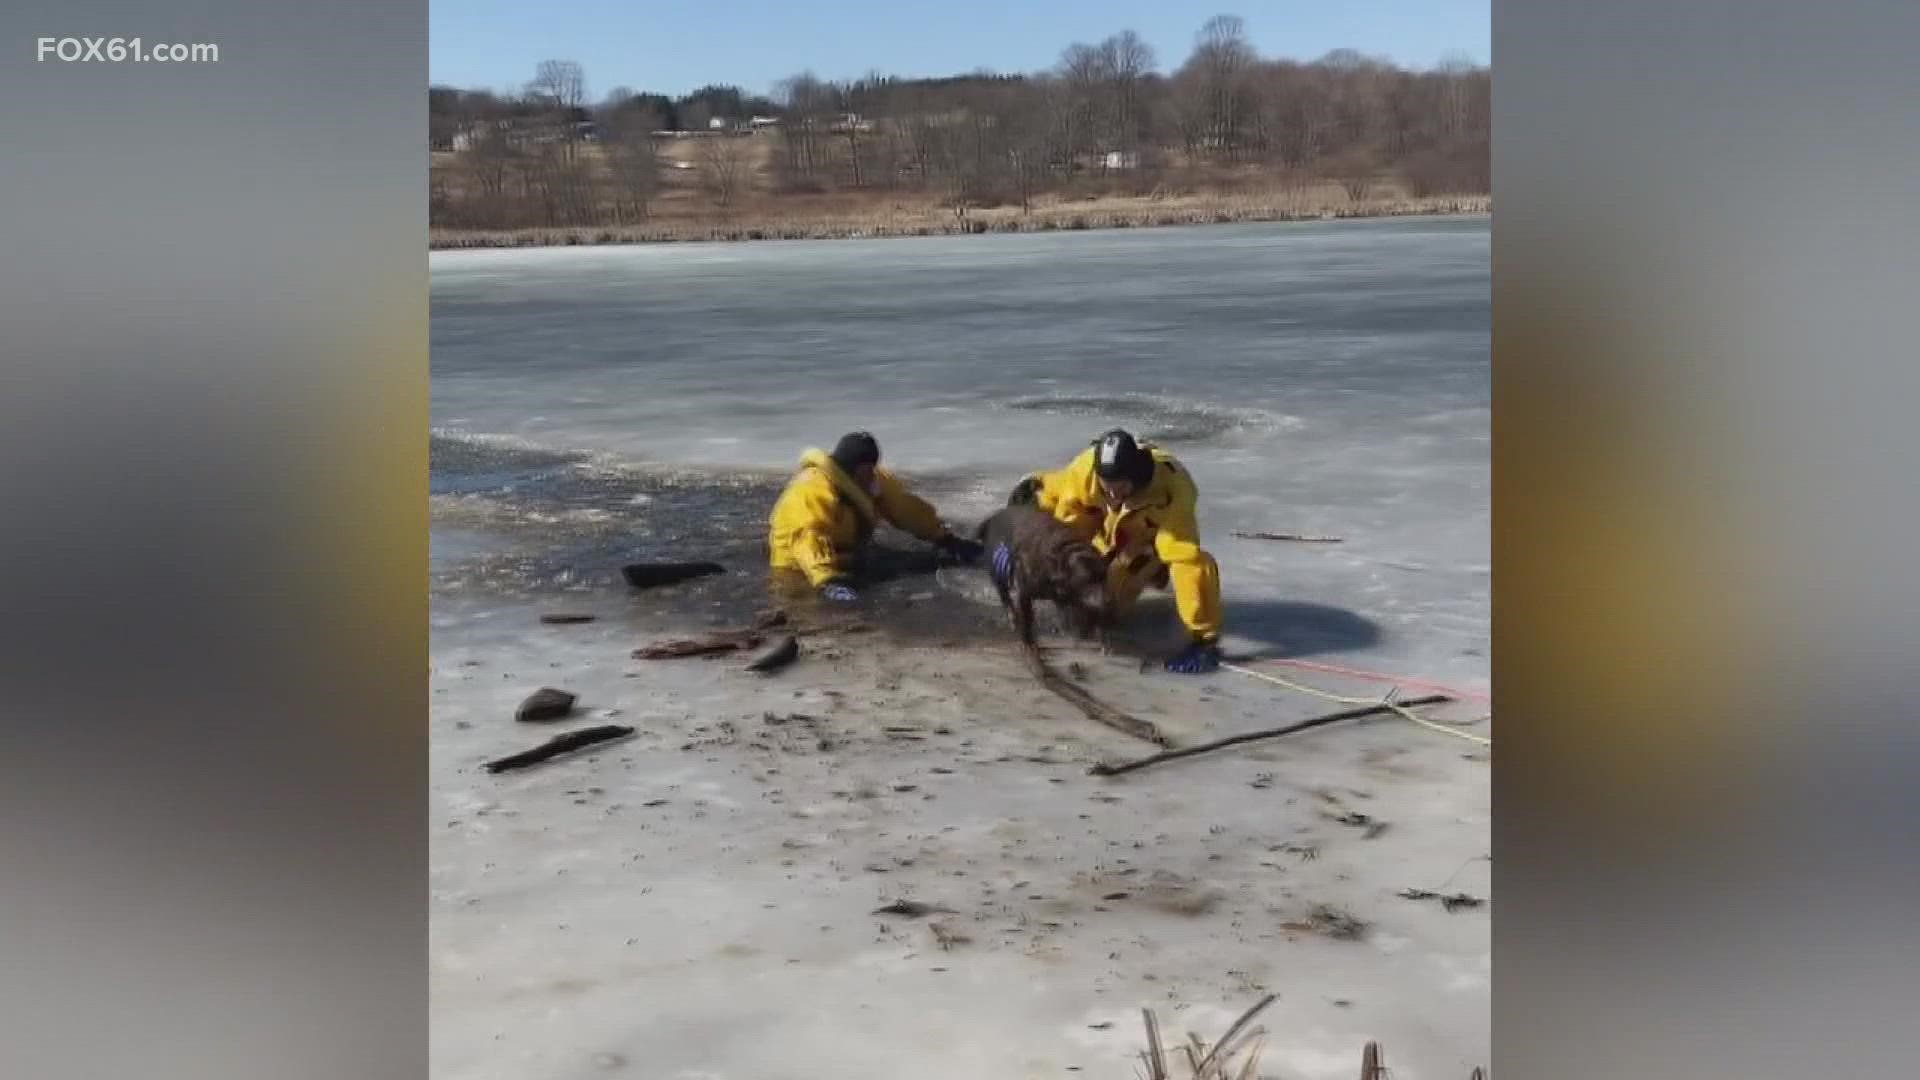 Using ice rescue gear and training, funded by donations from the public, crews successfully pulled the dog out of the water